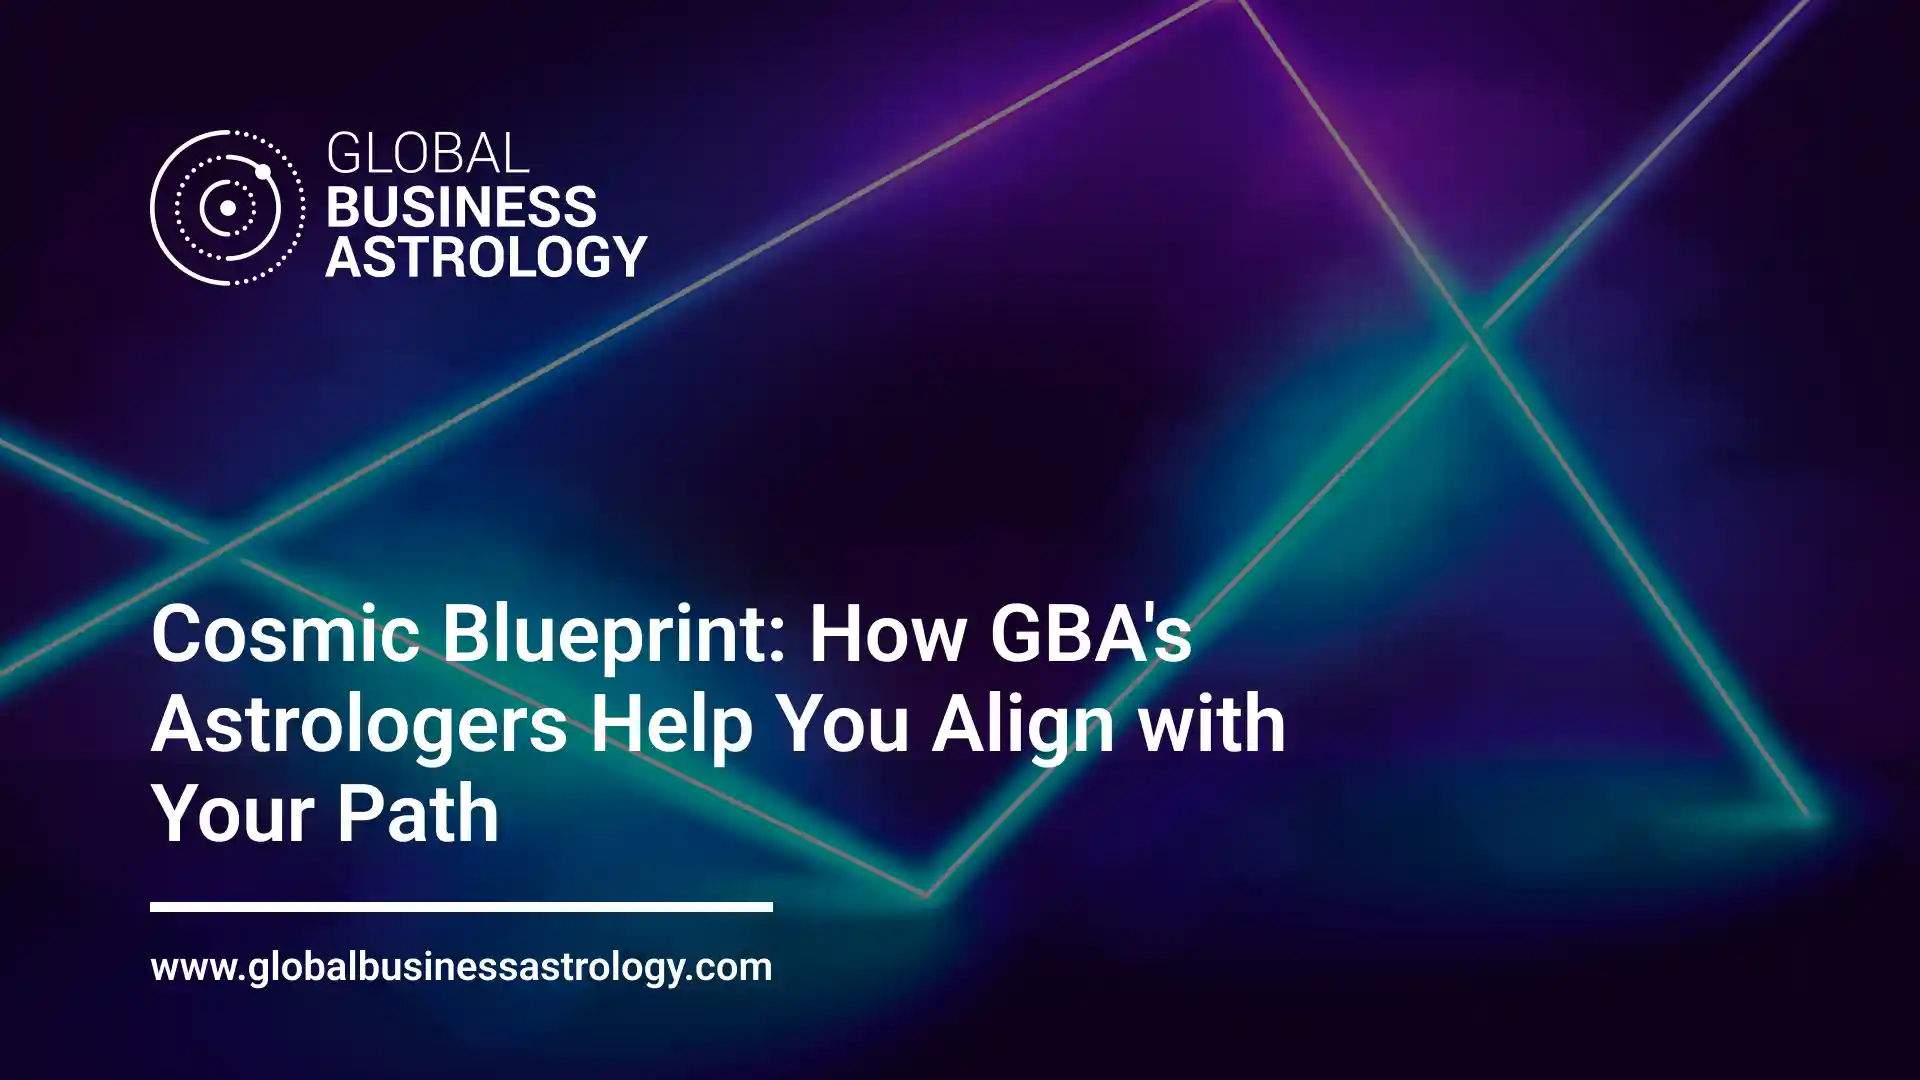 Cosmic Blueprint - How GBA's Astrologers Help You Align with Your Path